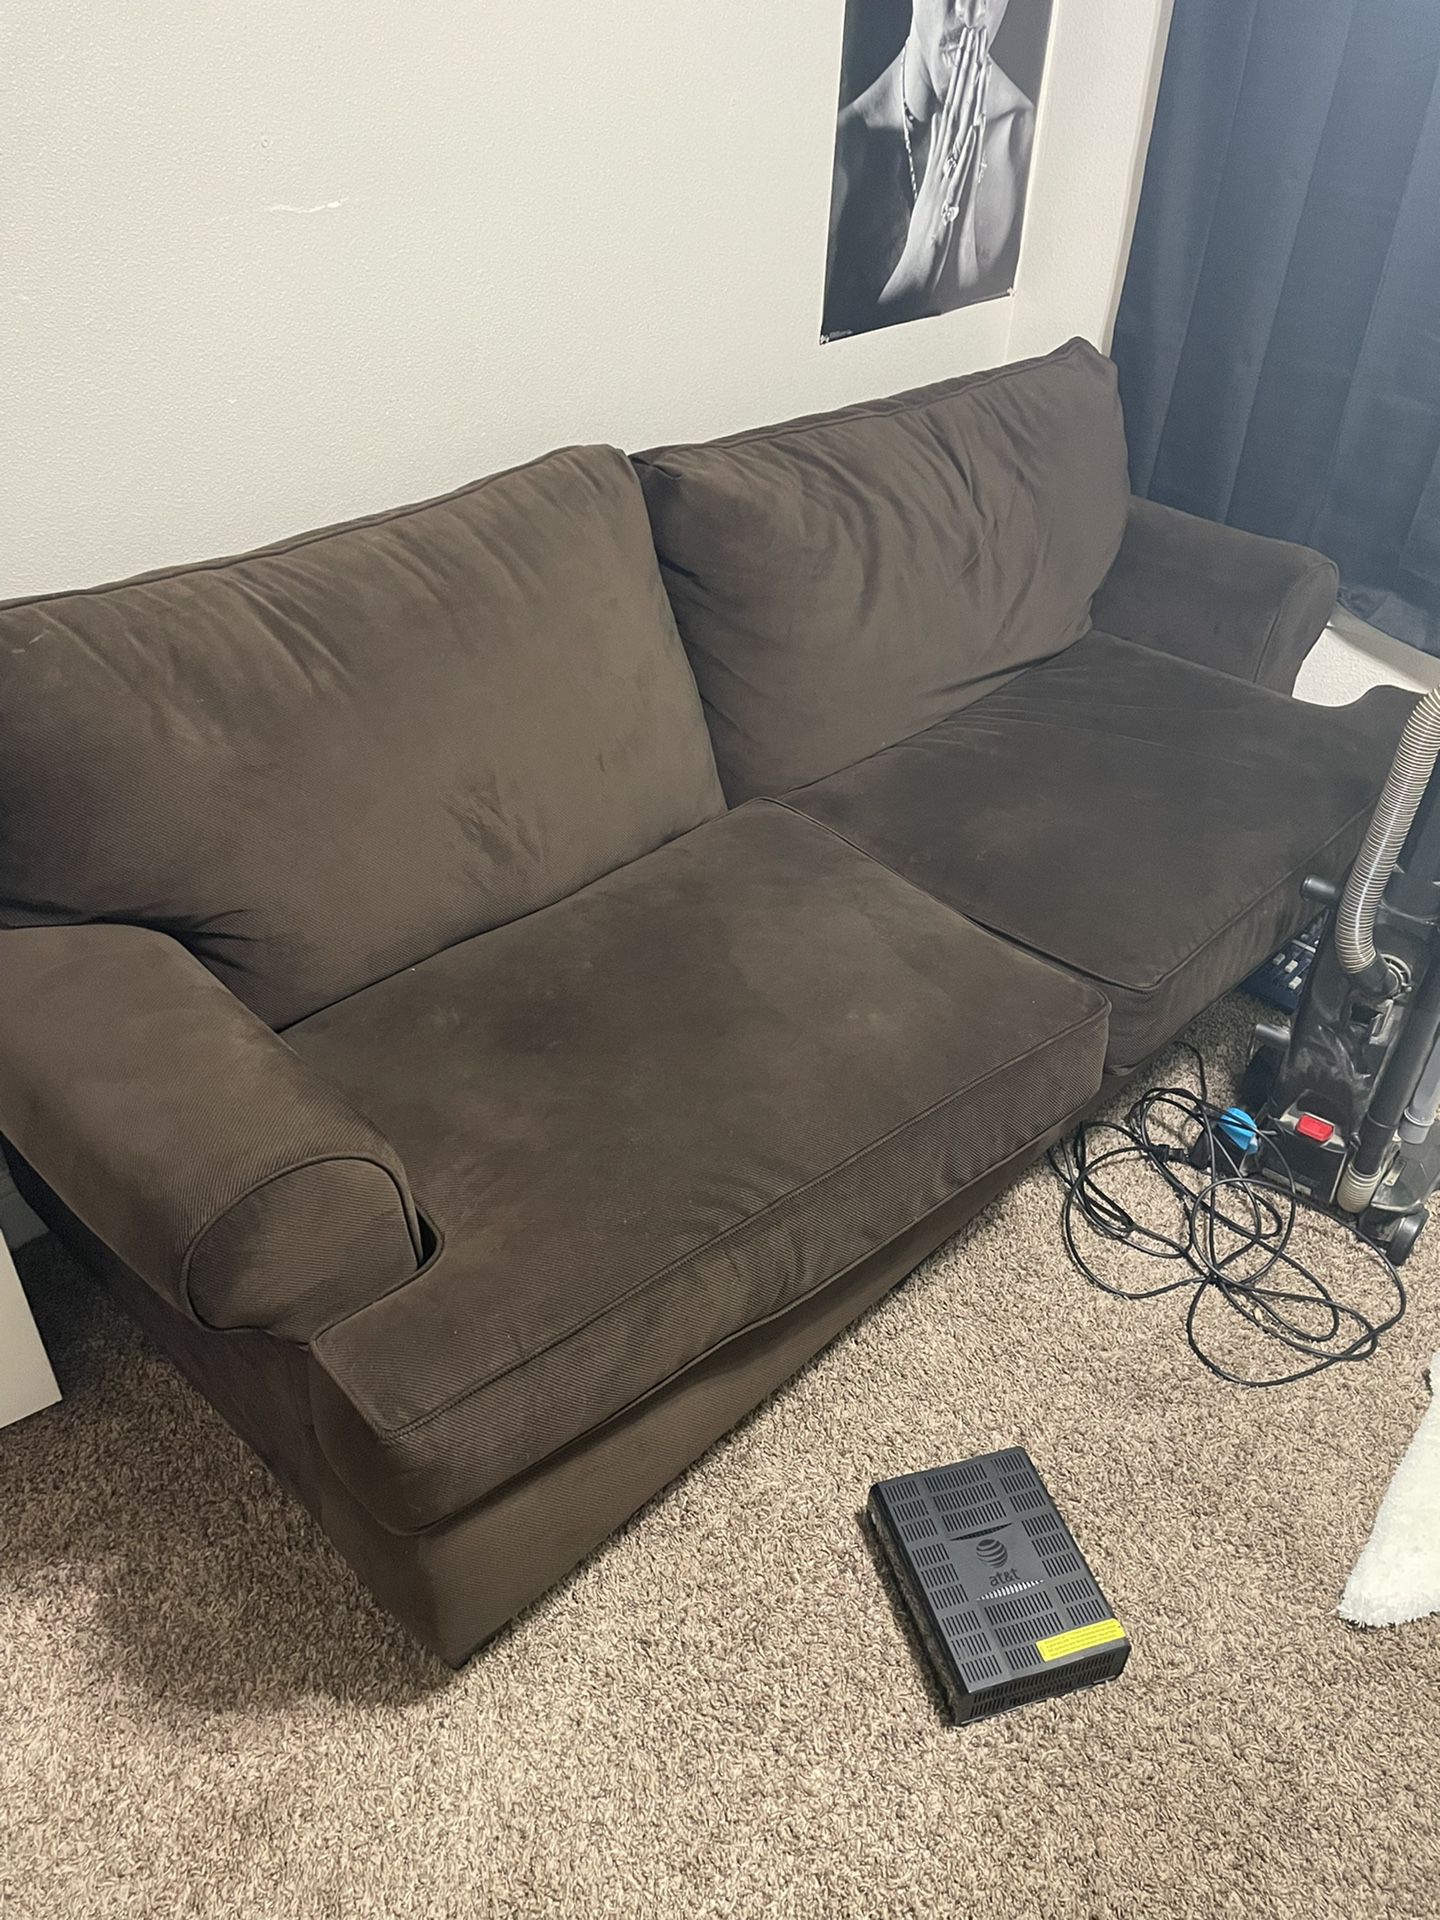 Couch 75$